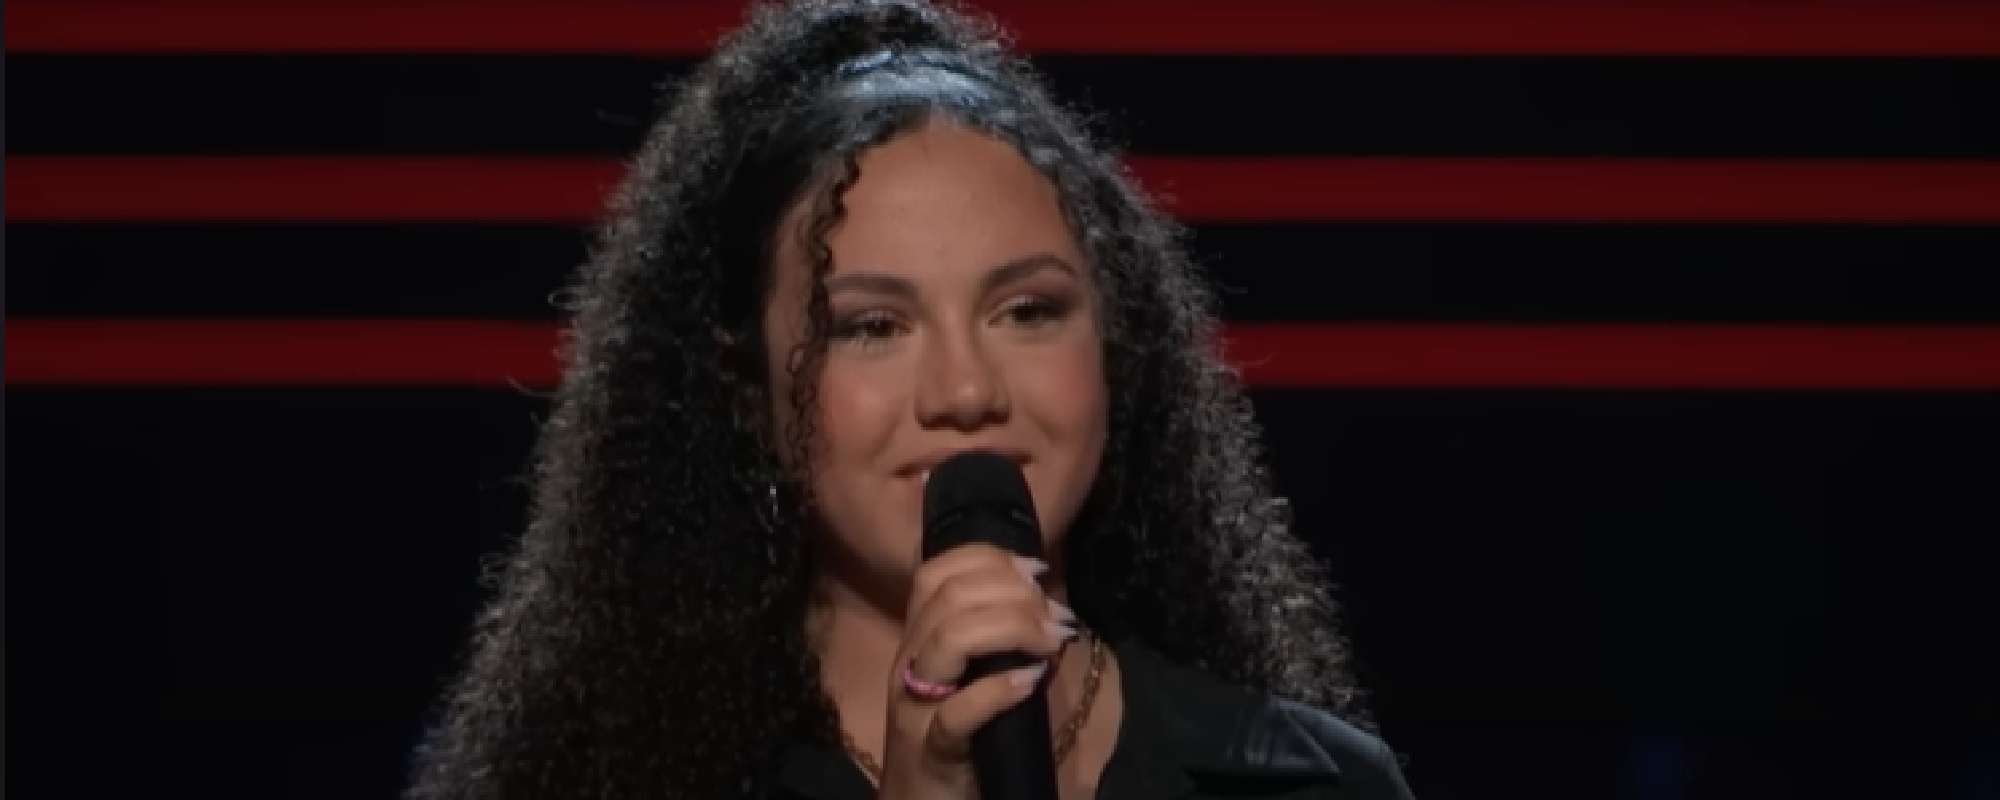 16-Year-Old Serenity Arce’s Return to ‘The Voice’ Ignites All-Out 4-Chair Battle